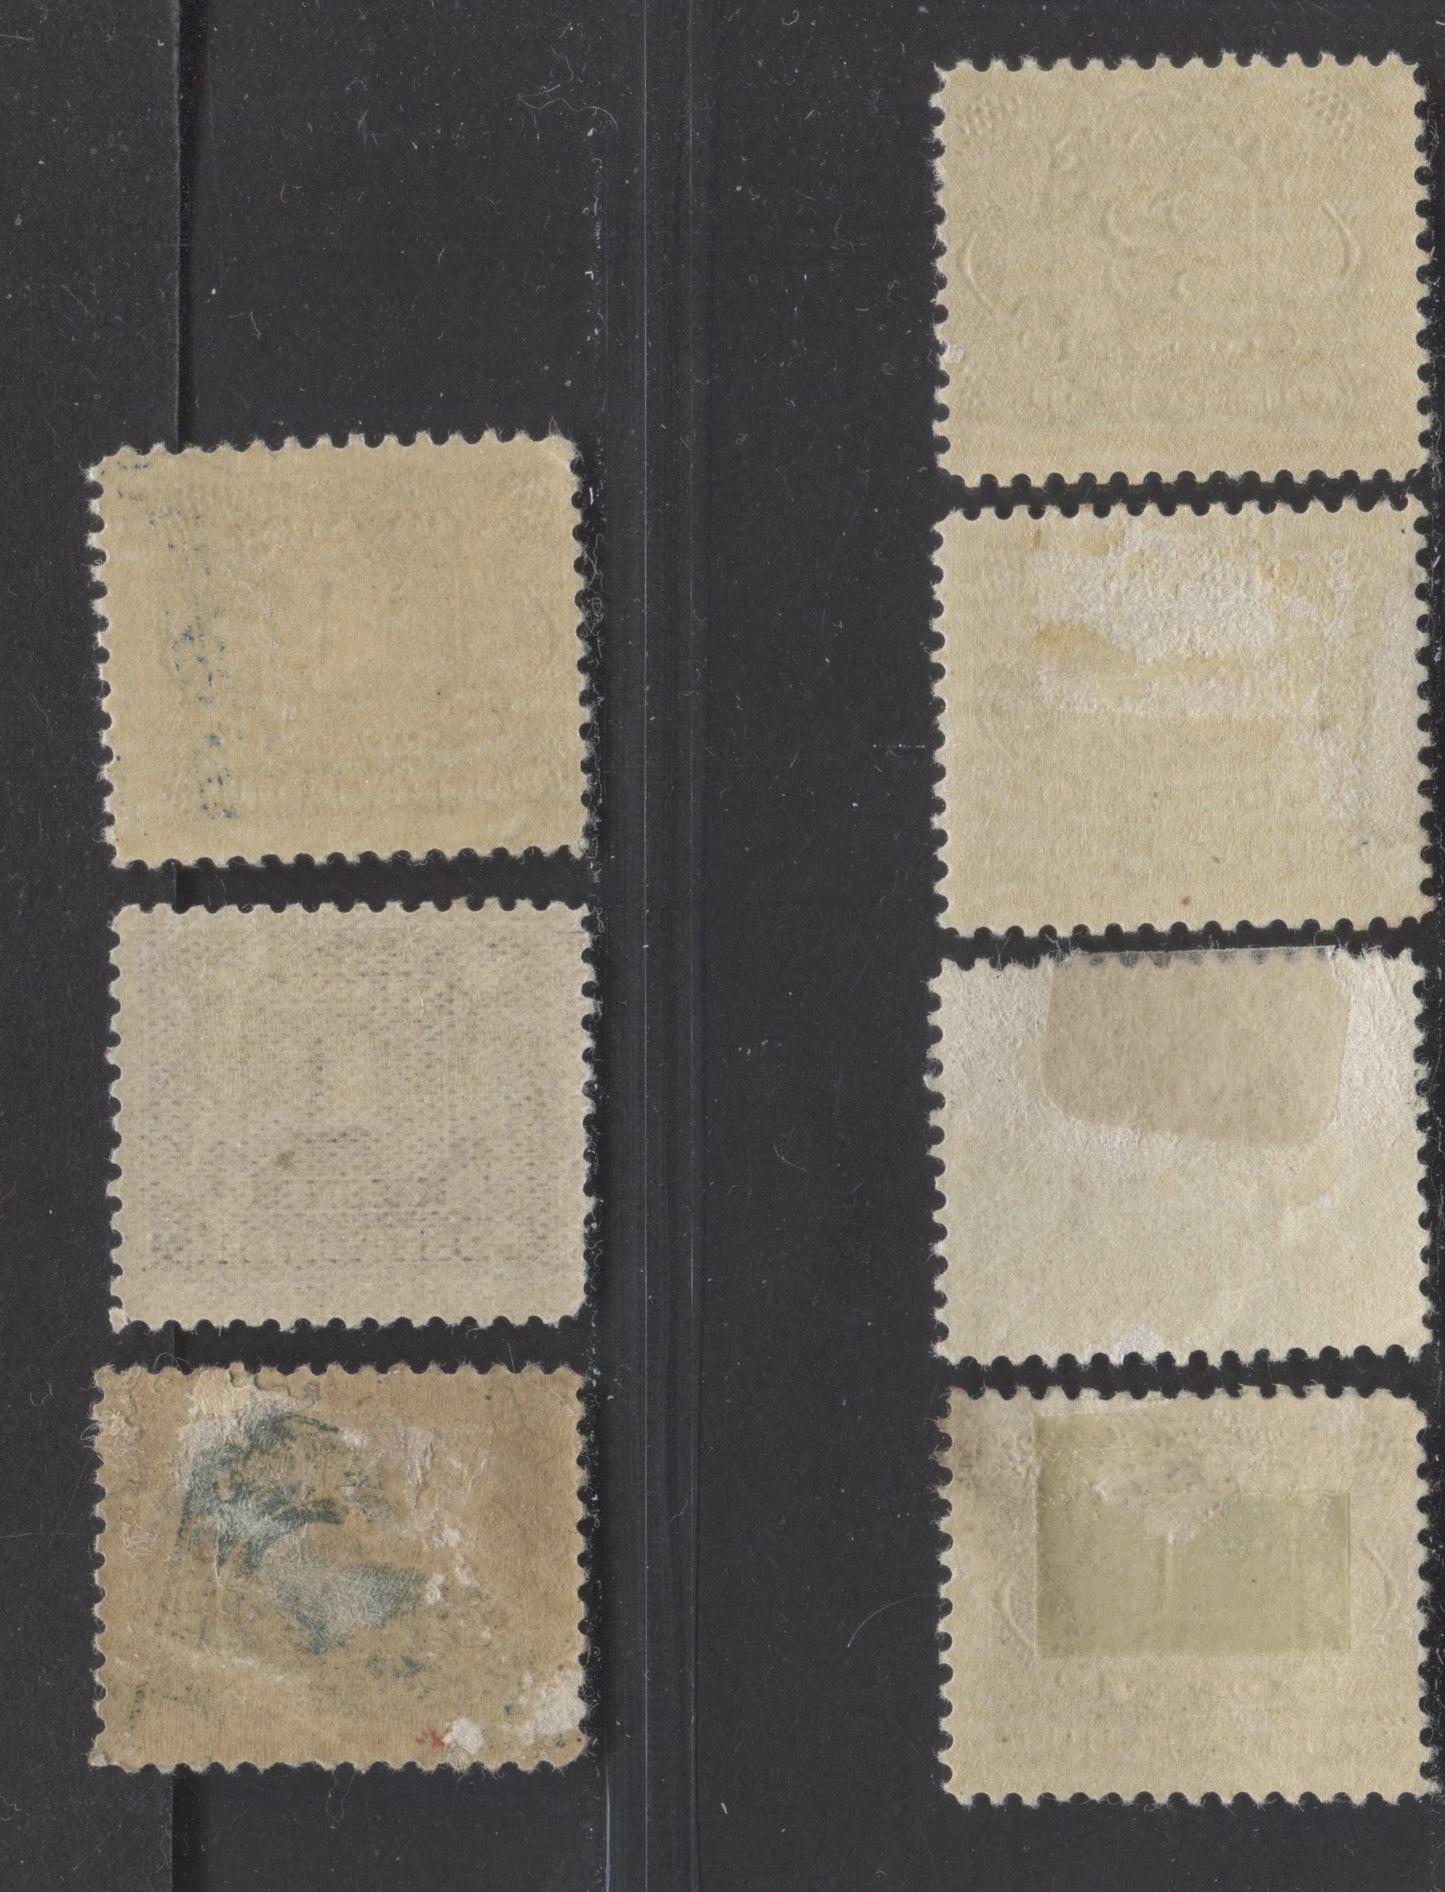 Lot 4 Canada #J1-J2c 1c & 2c Violet, 1906-1928 First Postage Due Issue, 7 VG/FOG Singles With Different Shades & Papers